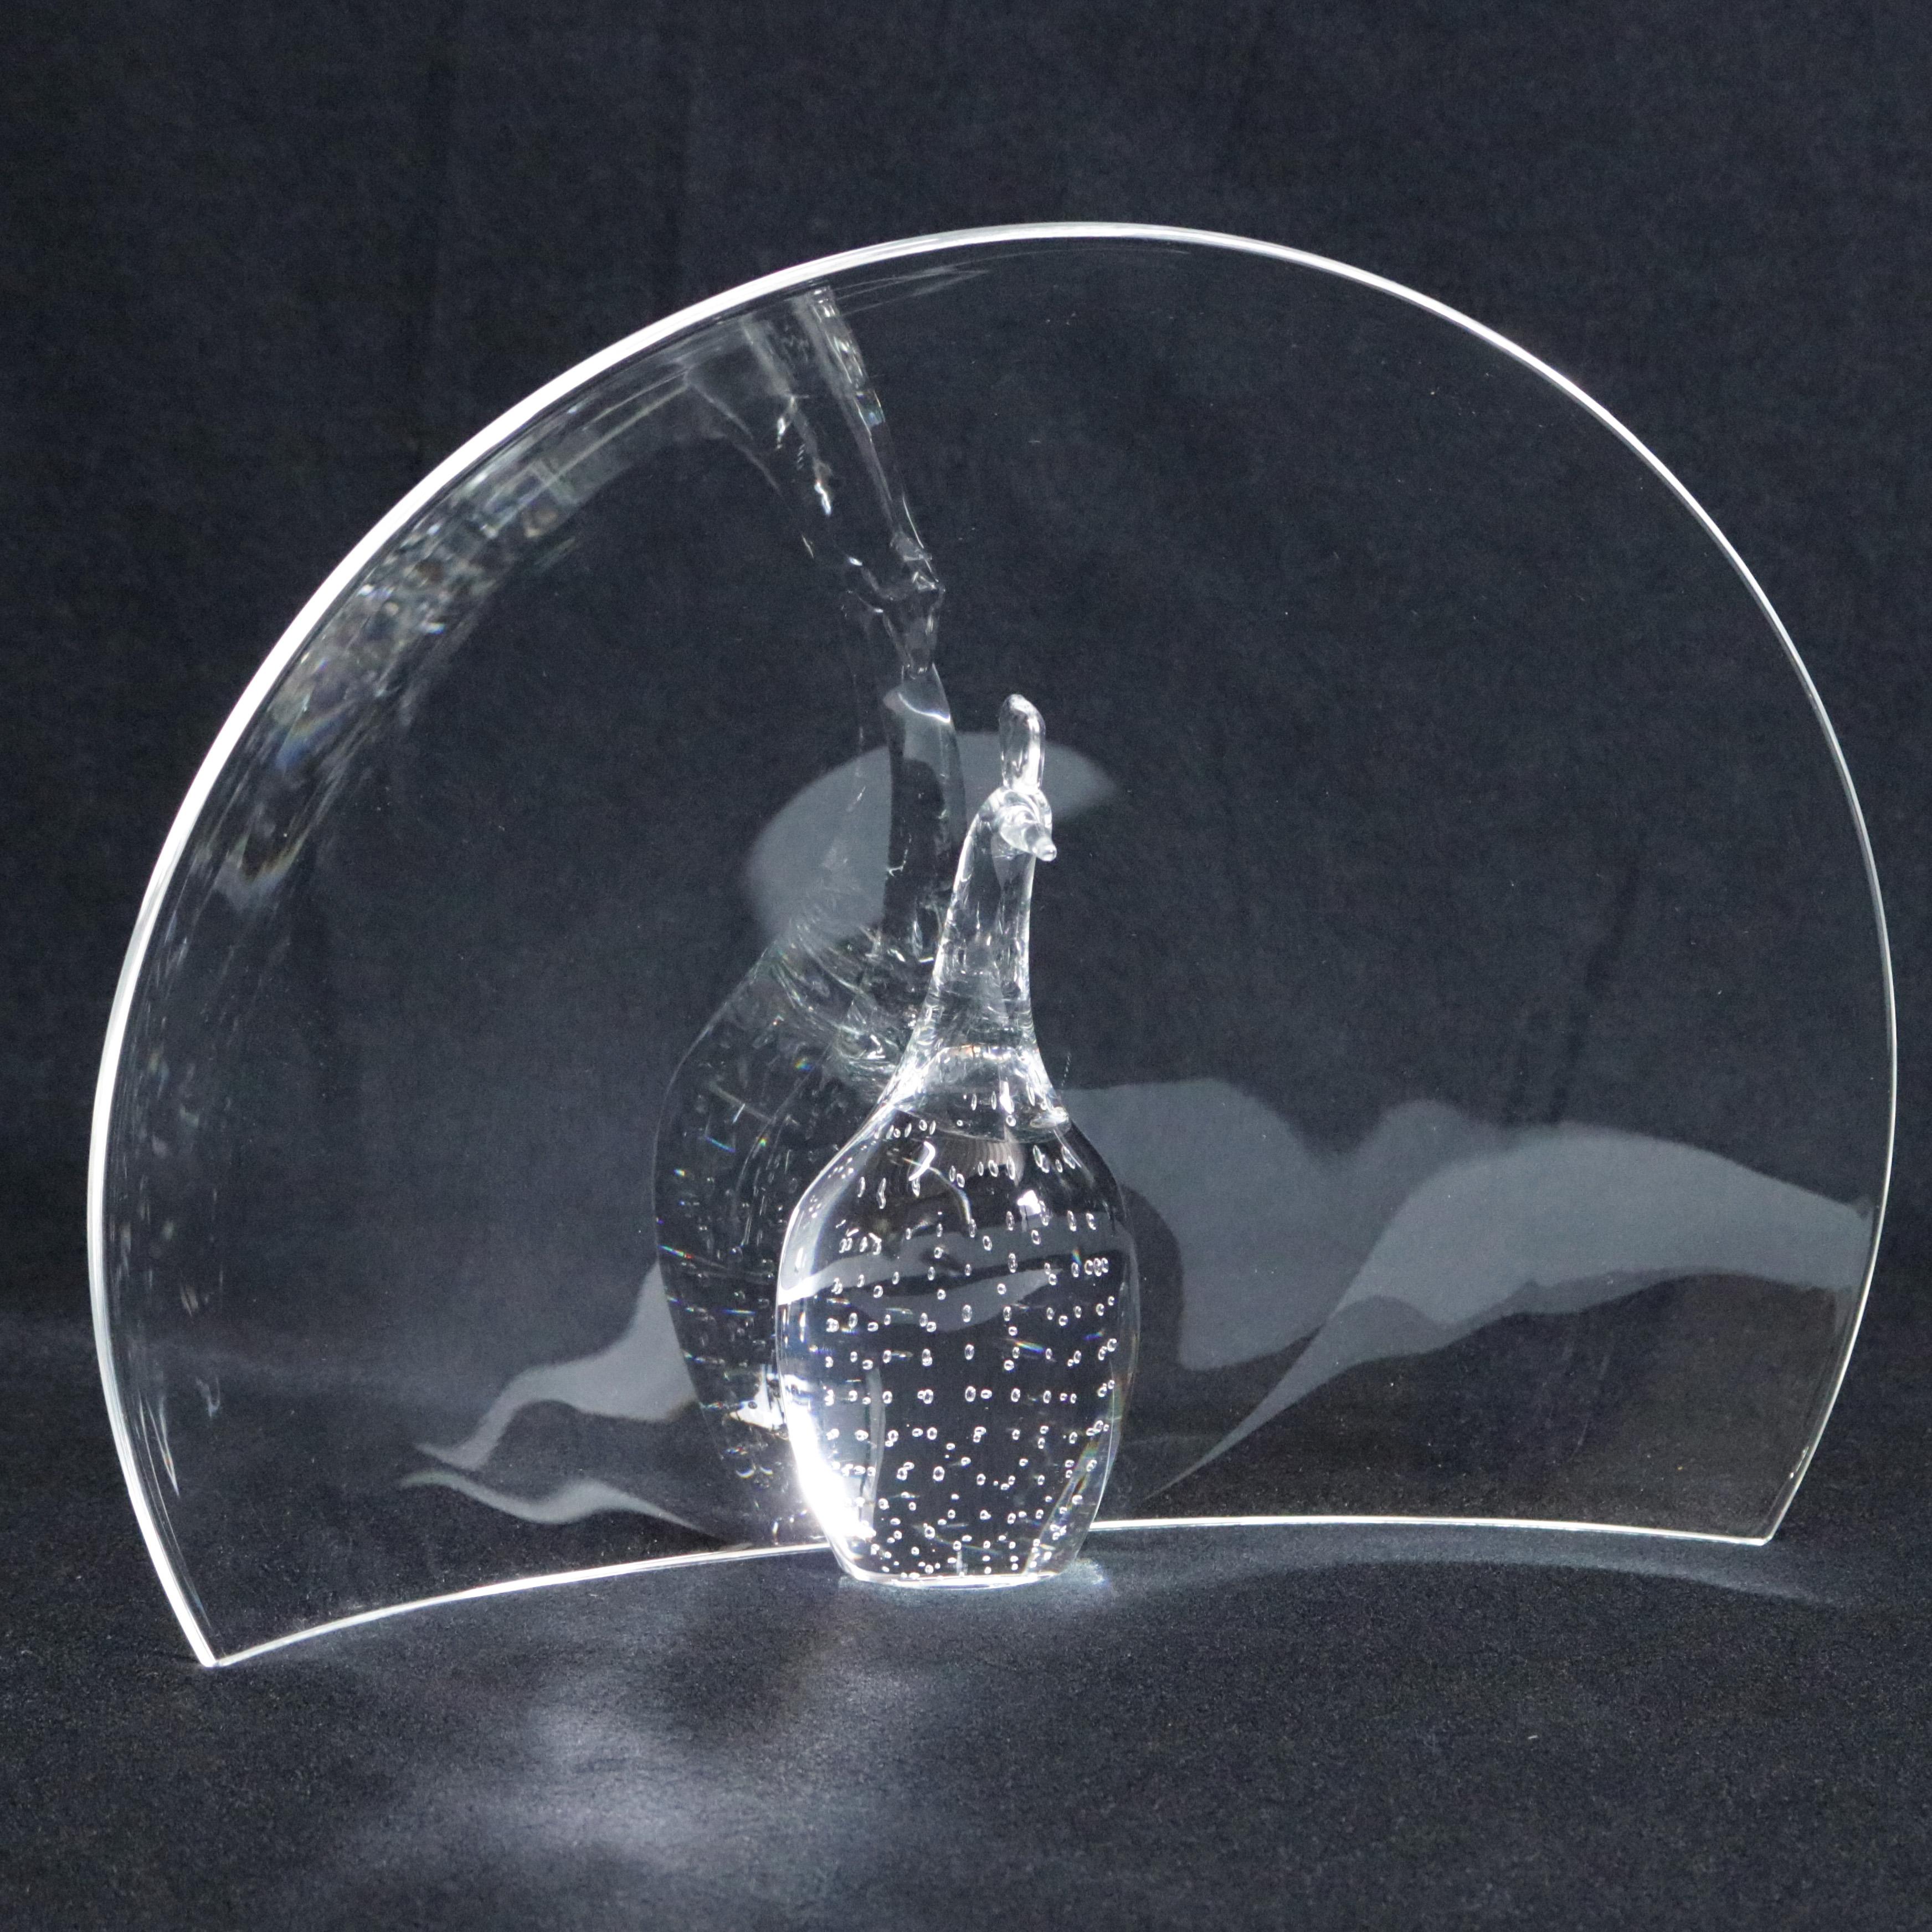 American Steuben Crystal Sculpture Paperweight of Peacock by Bernard X. Wolff, Signed